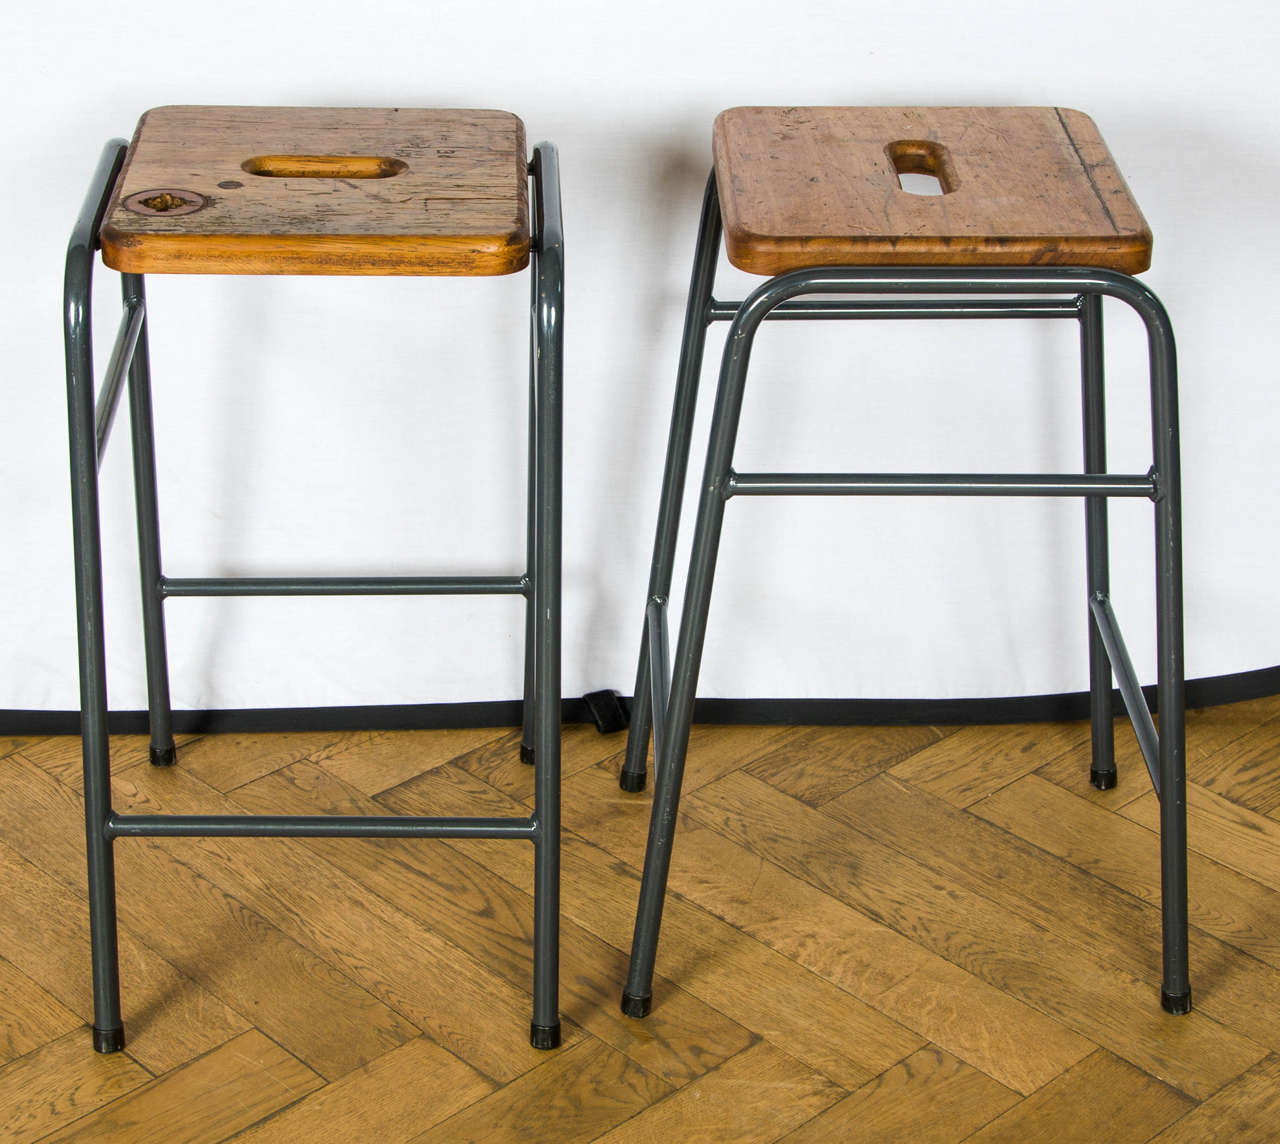 A set of 30 reclaimed retro style stools with a tubular metal bases and a characterful teak tops.